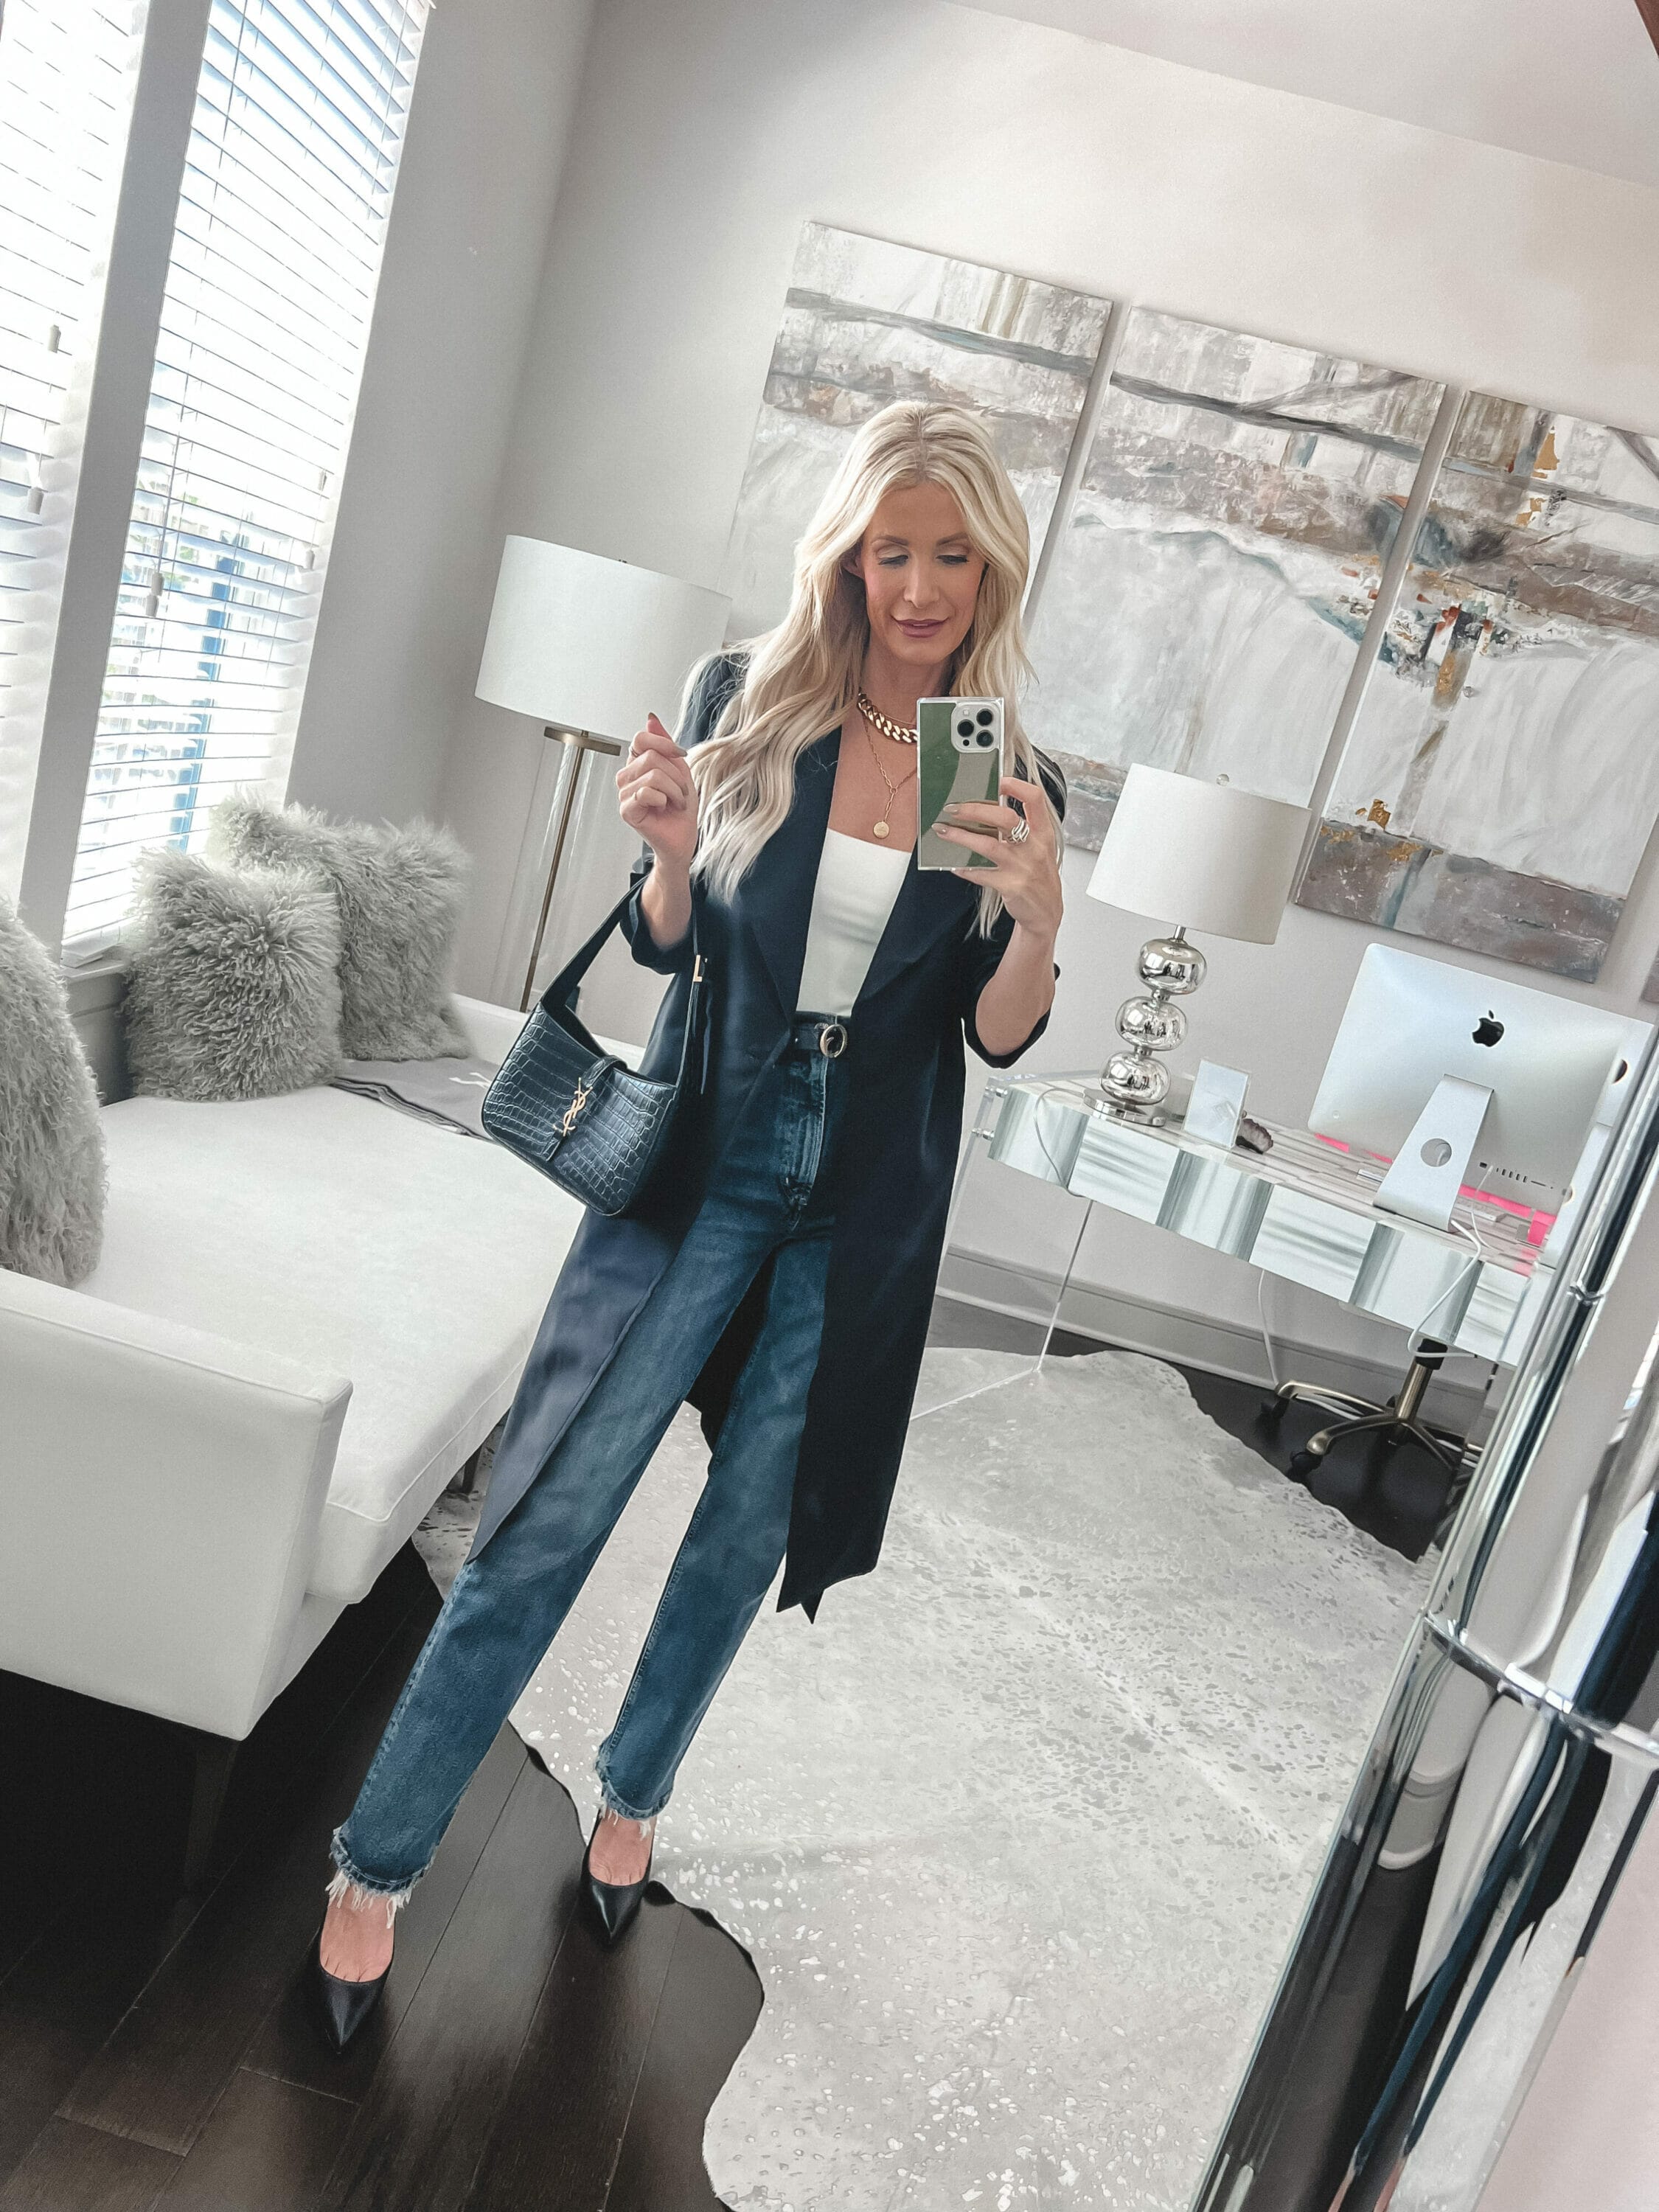 Over 40 fashion stylist from Dallas wearing a Lilysilk trench coat with a white bodysuit and denim as one of 8 style tips to look classy and elegant.